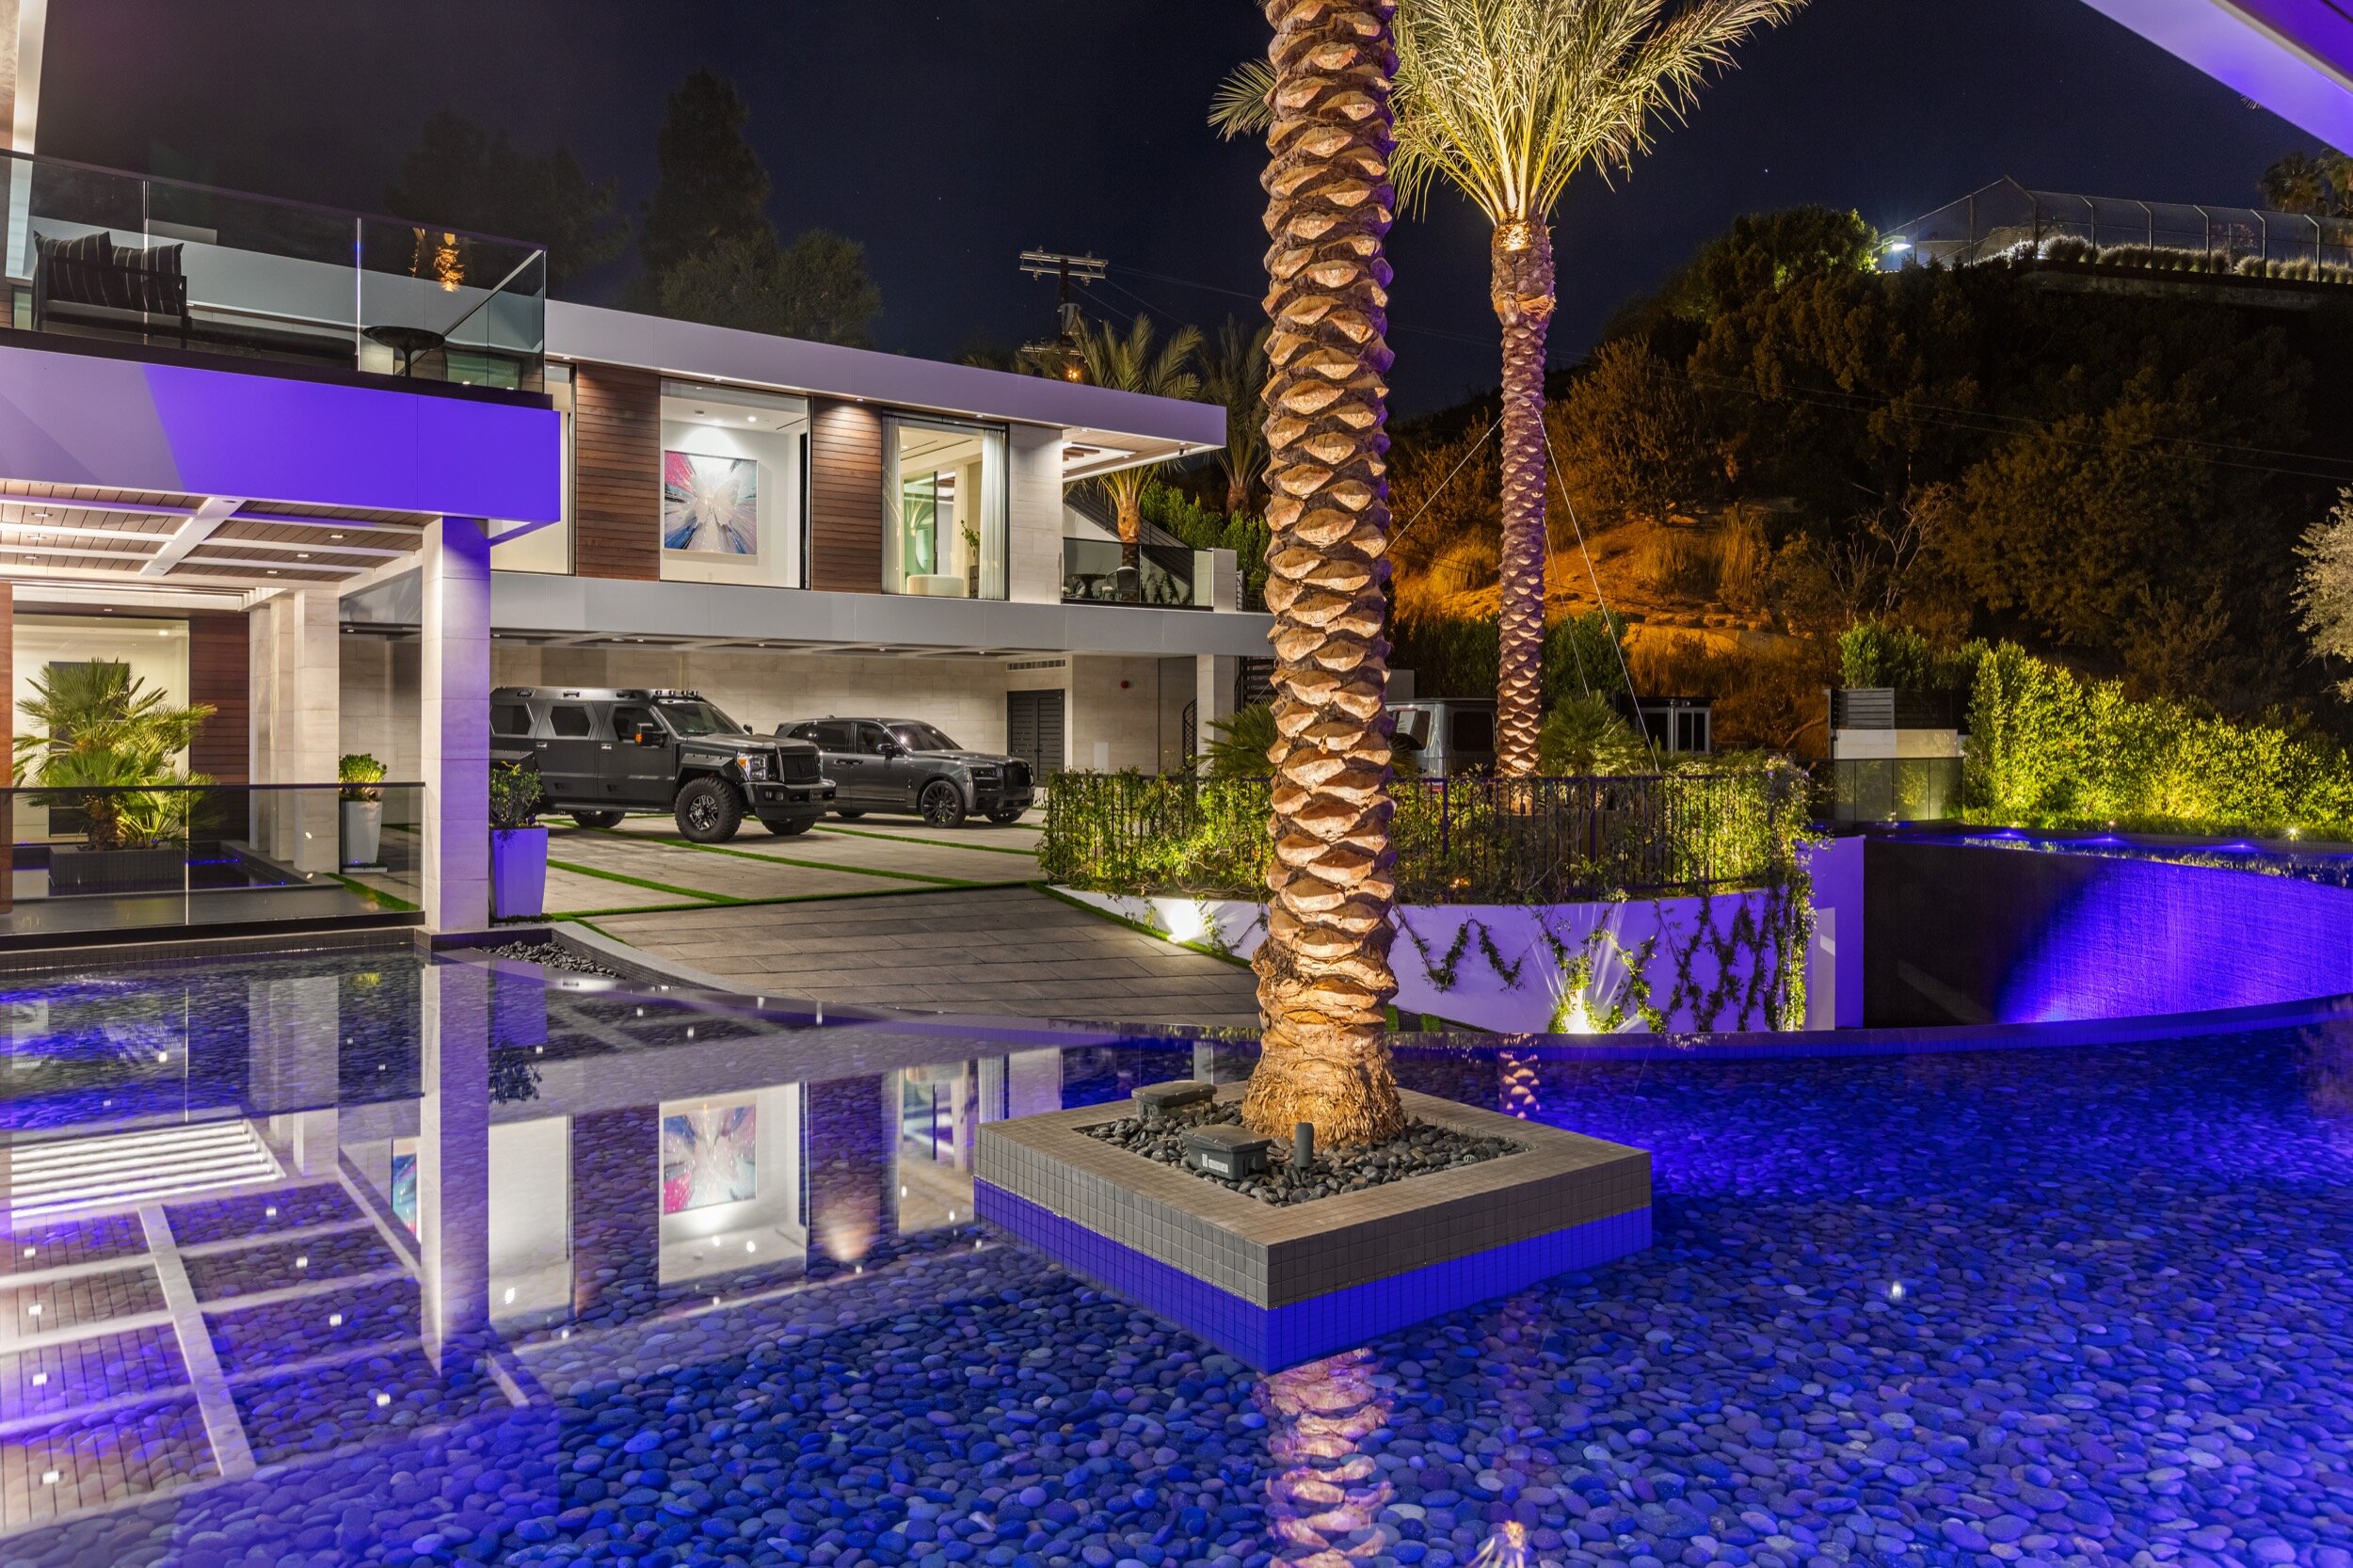 luxury style homes & lighting | modern design blog | whipple russell architects